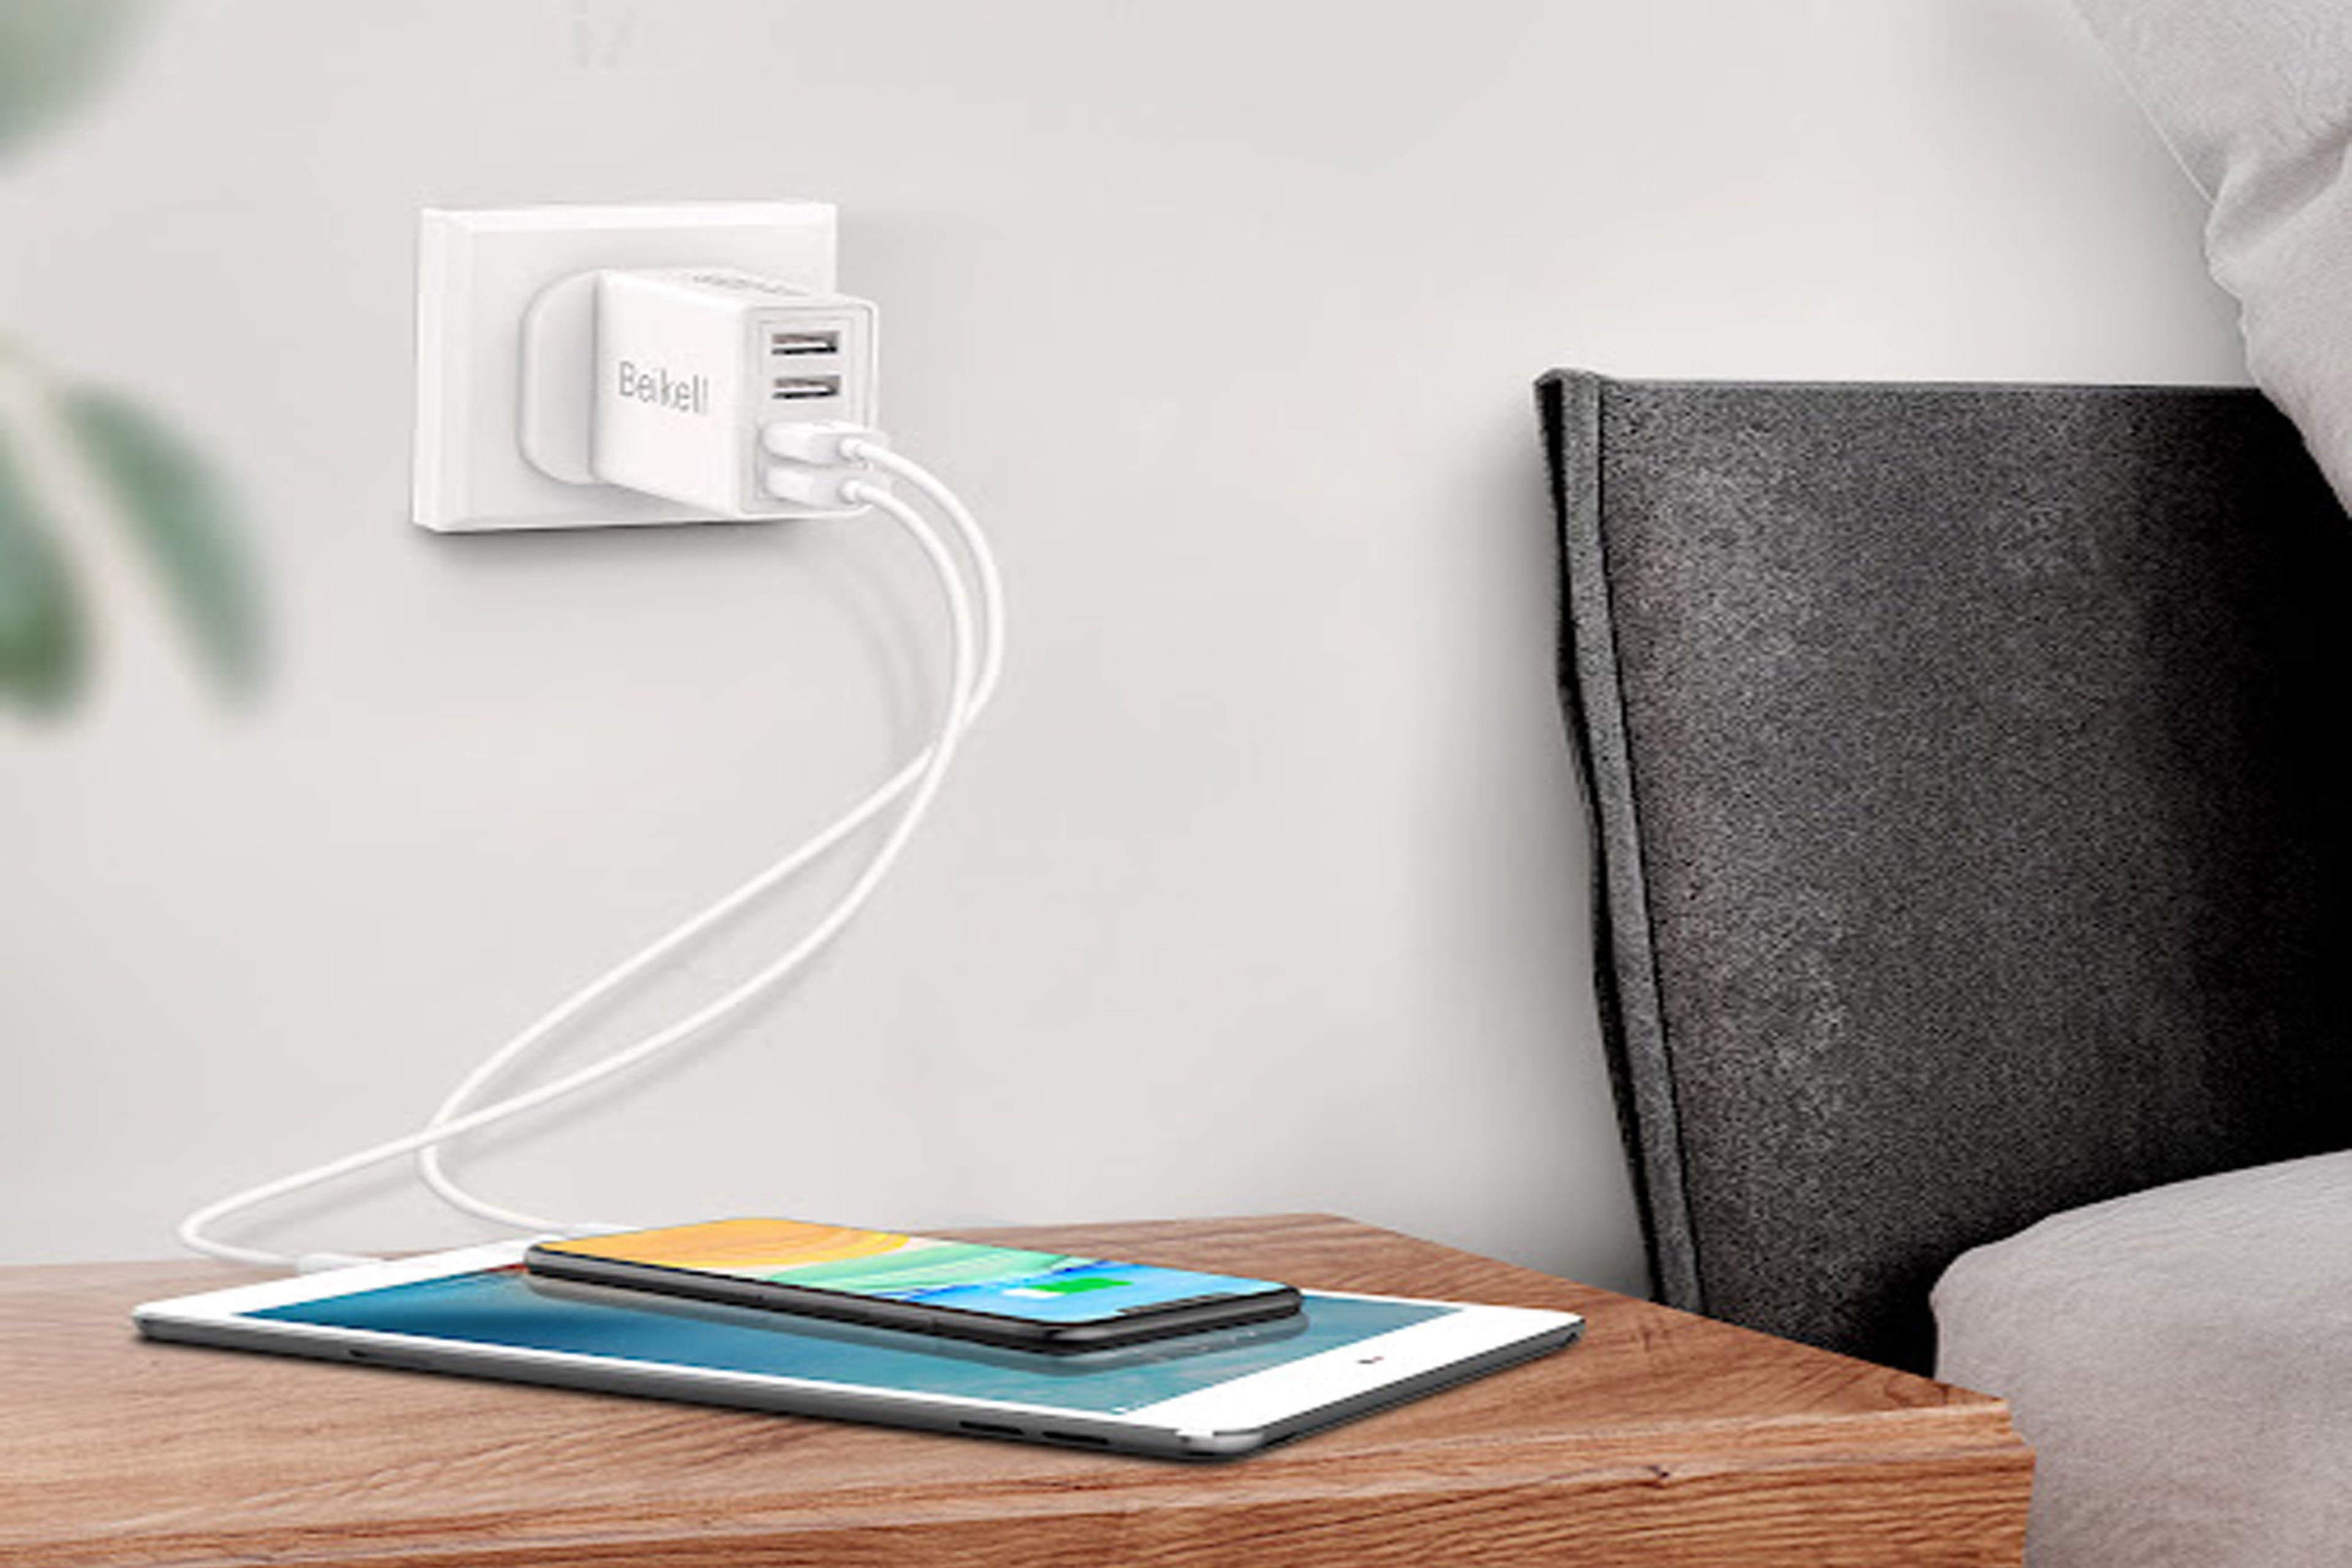 Beikell USB Charger